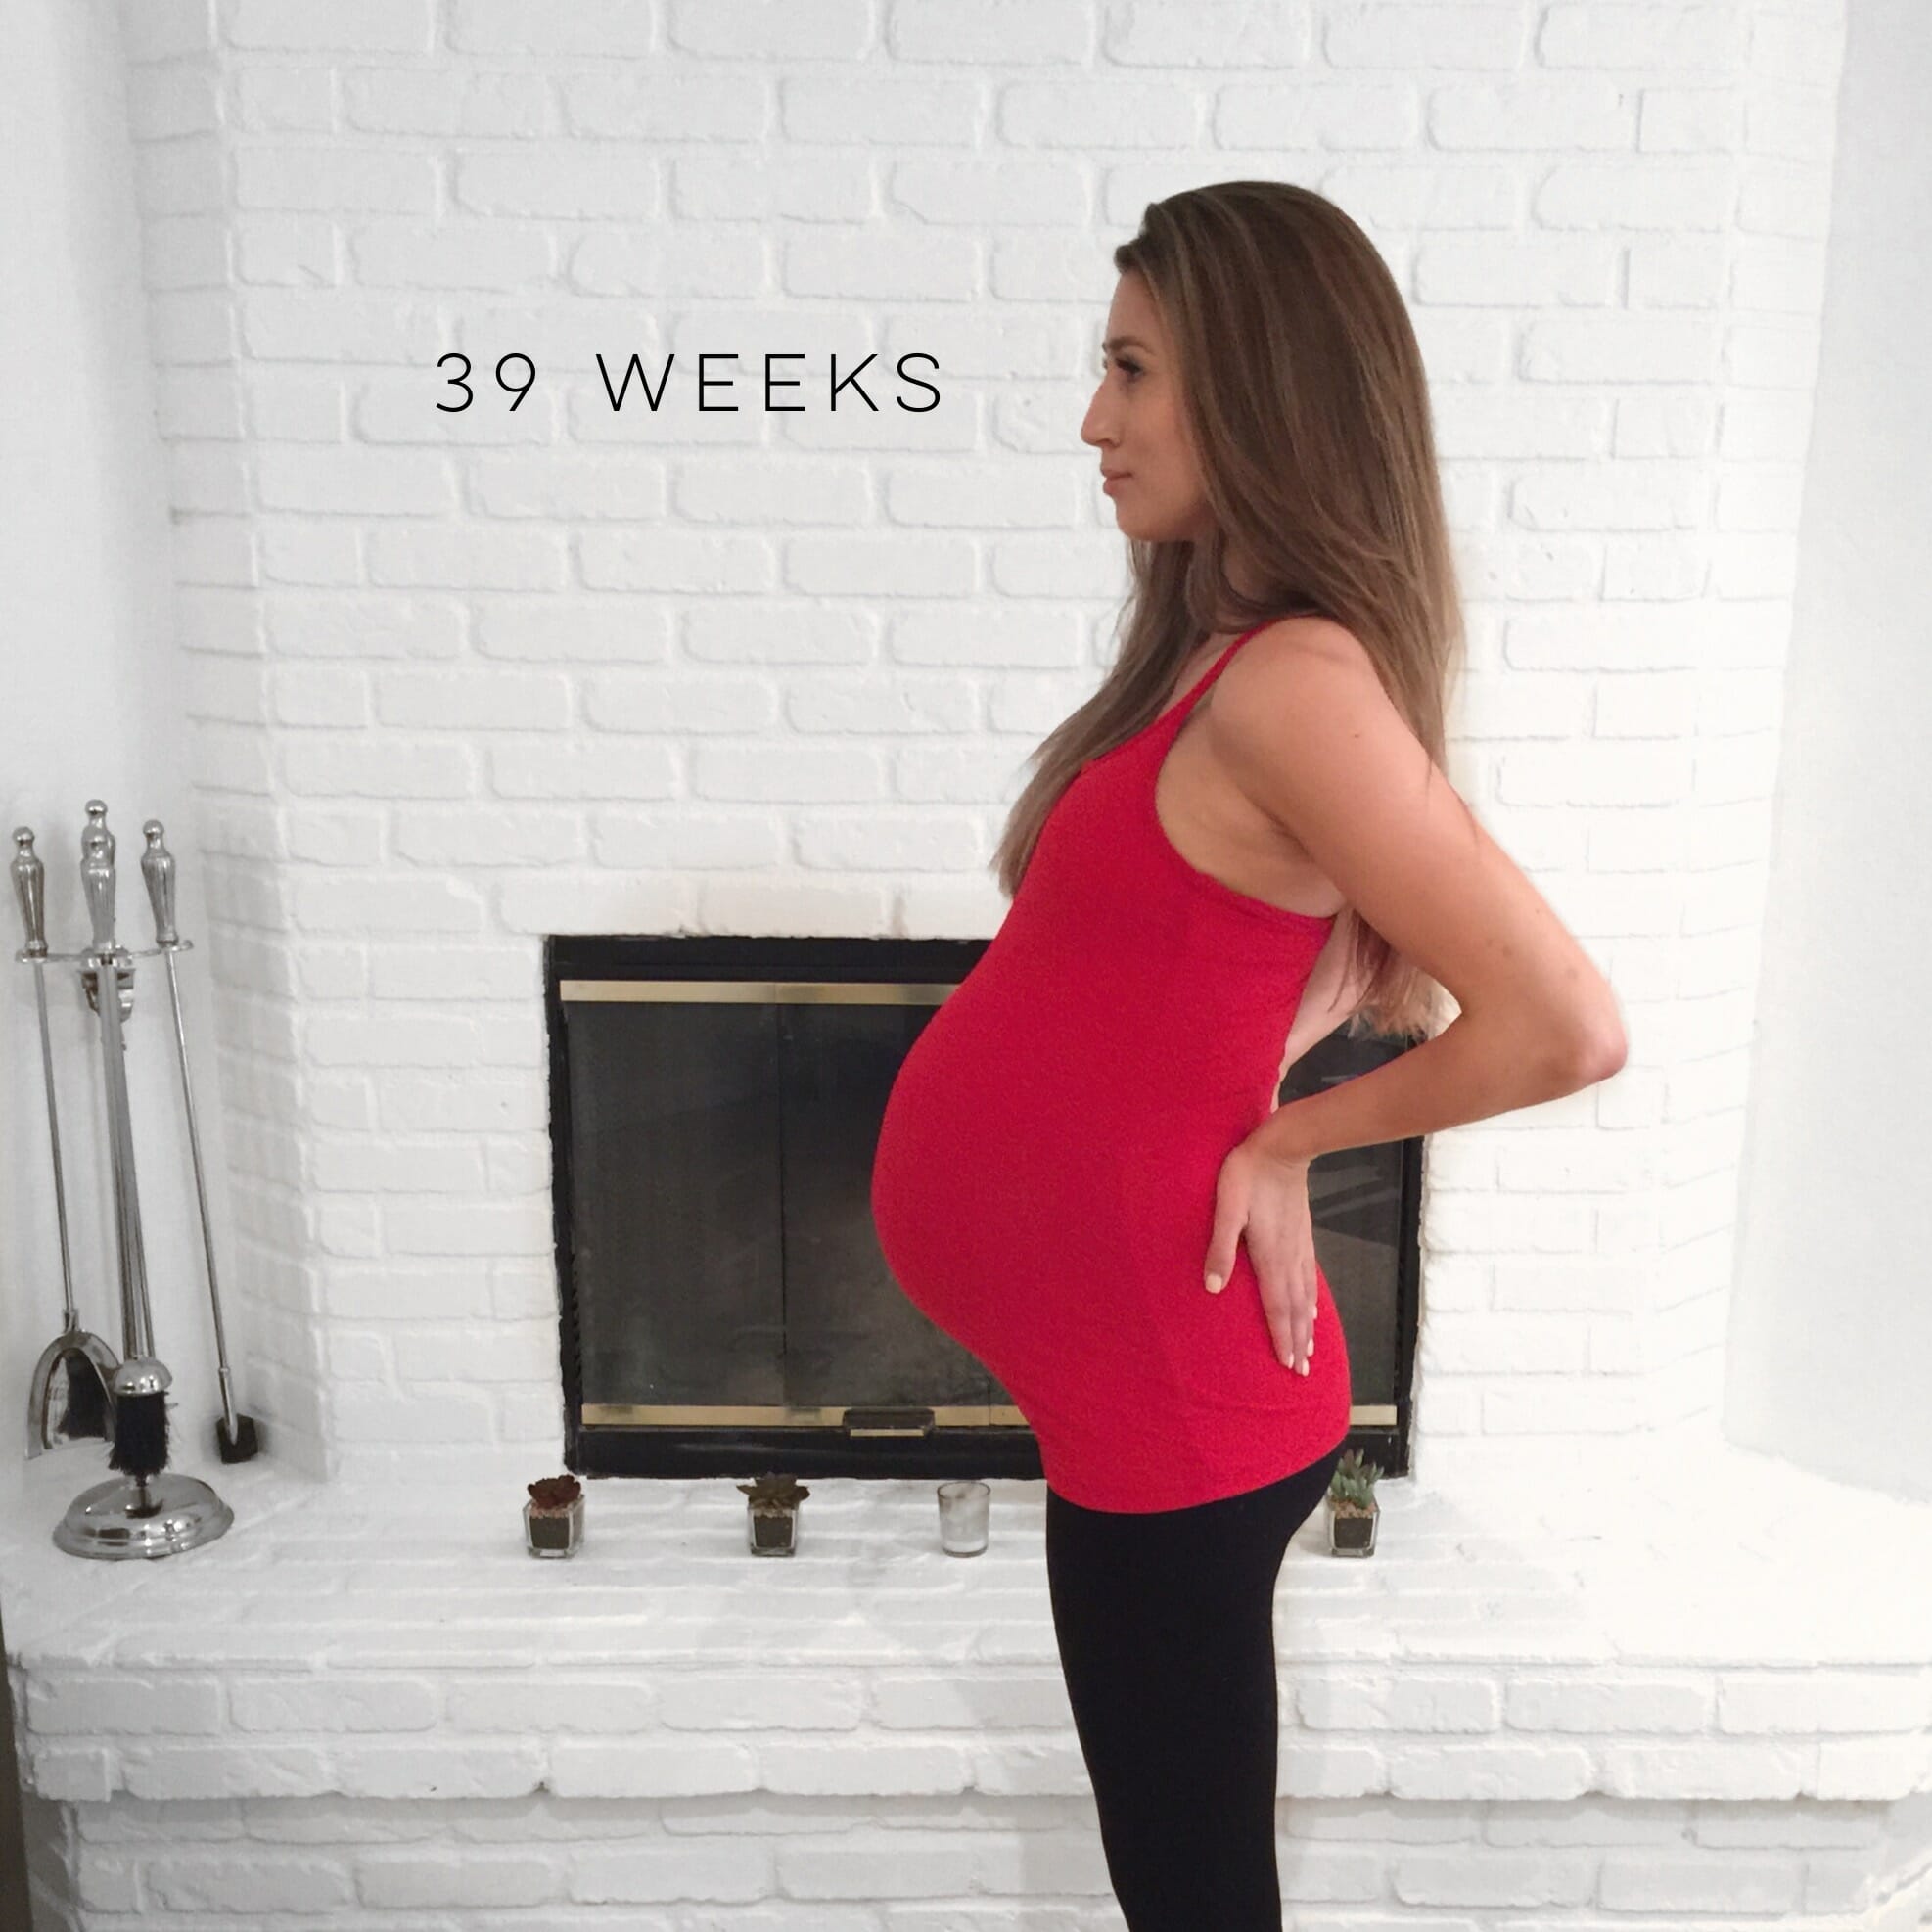 39 WEEKS PREGNANT - What Lola Likes